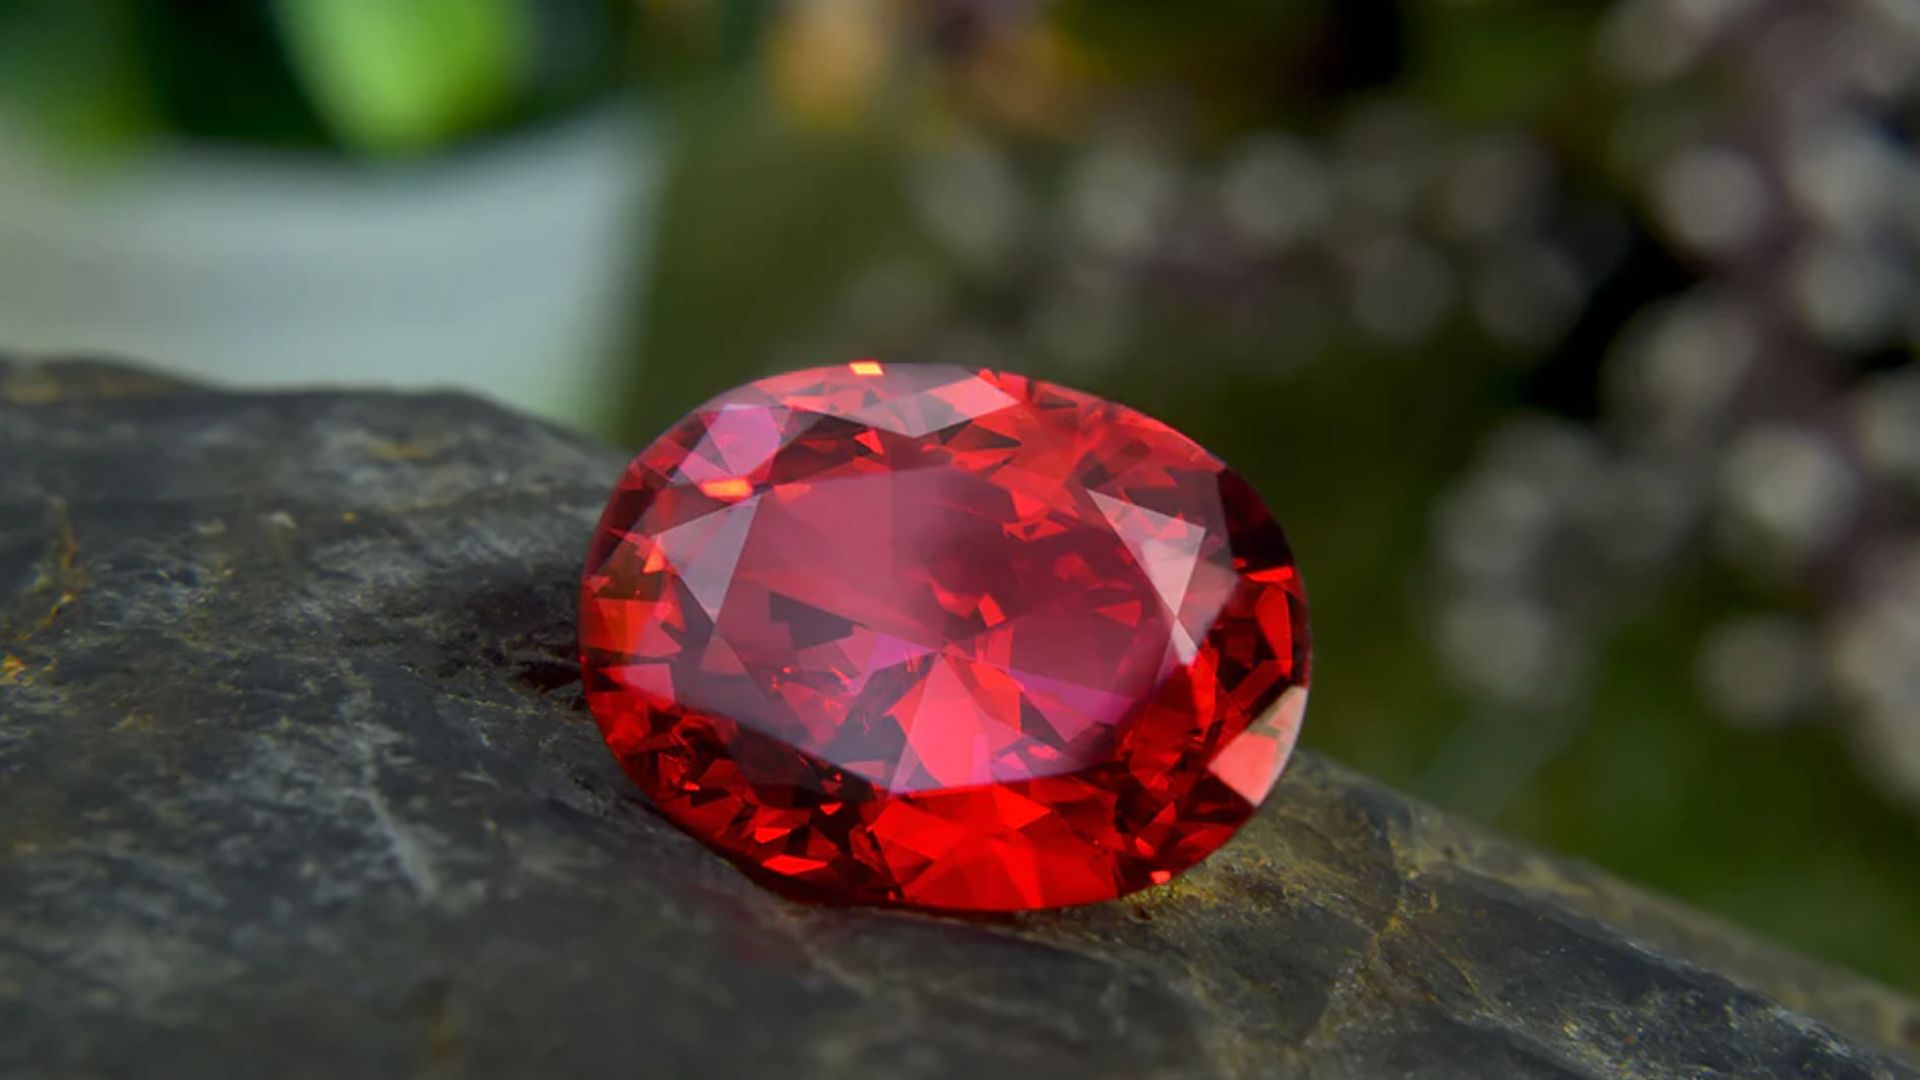 What Is The Least Valuable Birthstone?